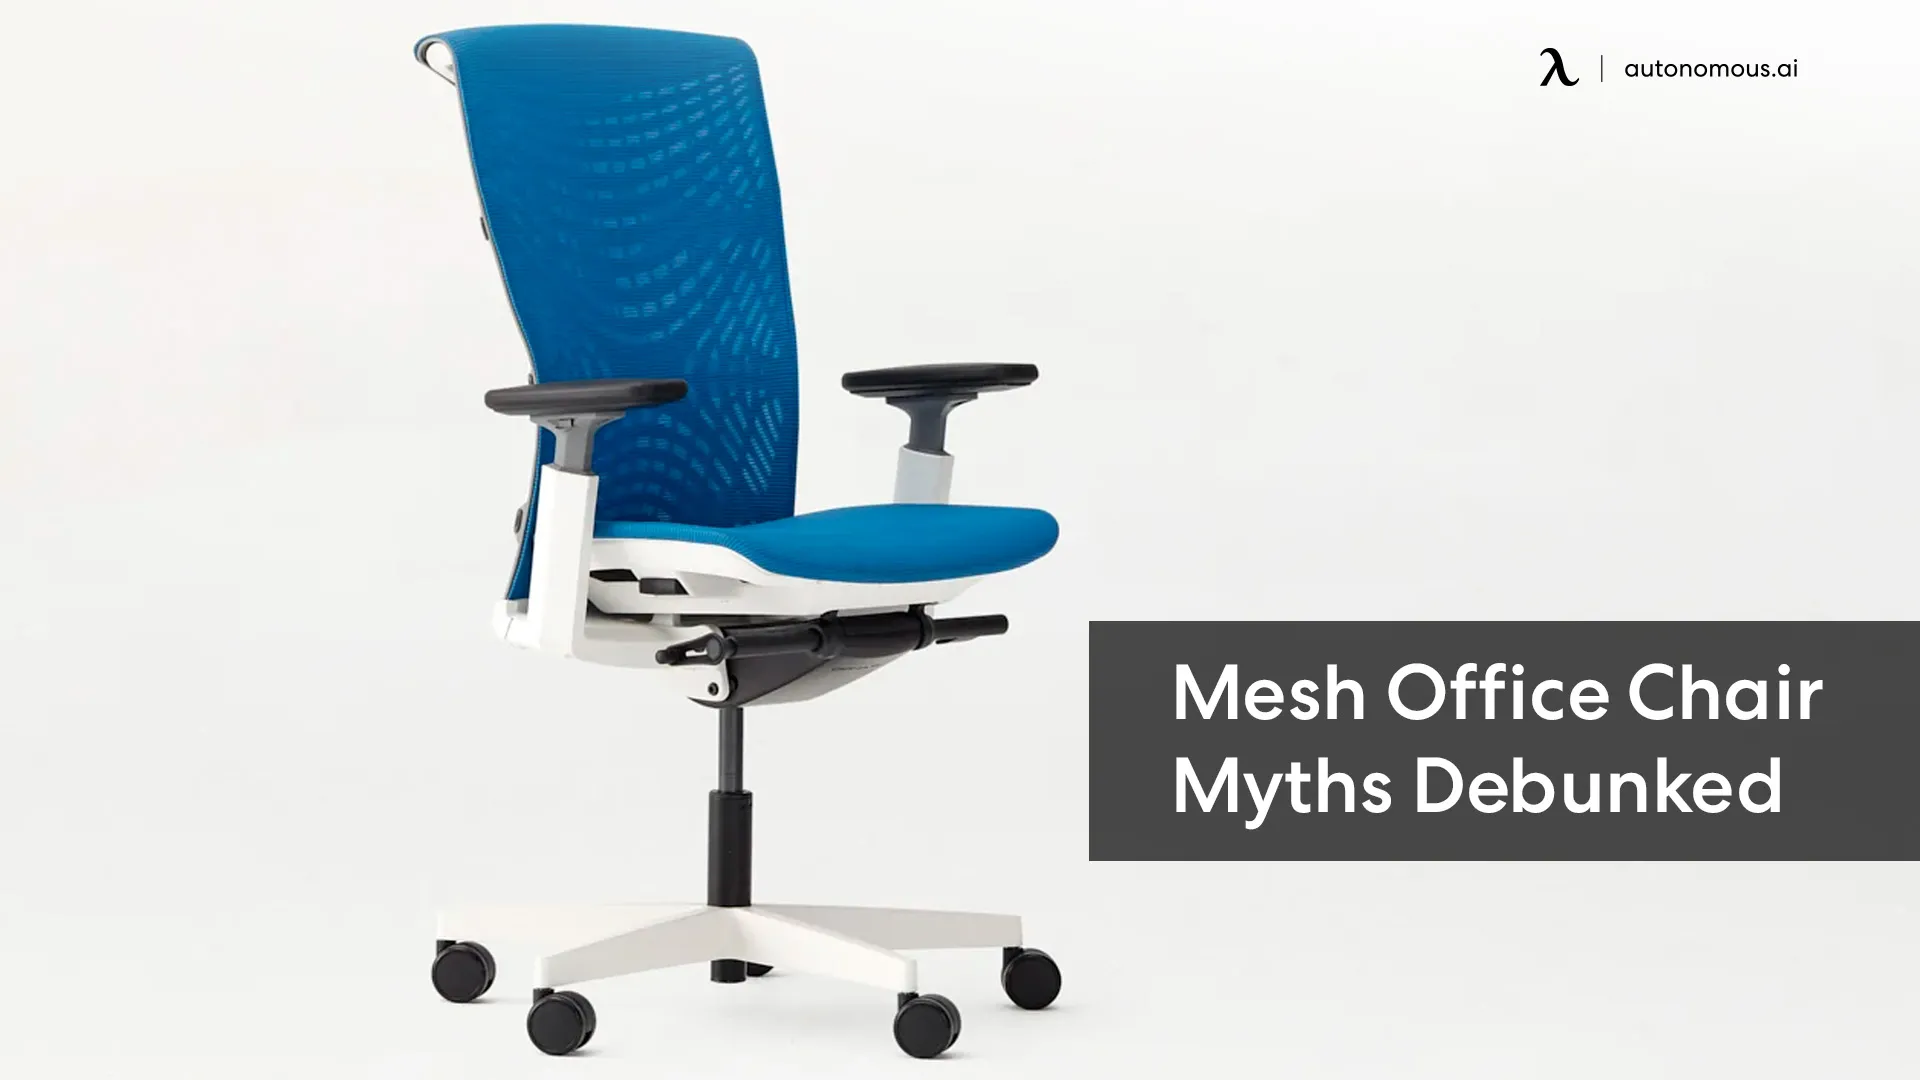 9 Mesh Office Chair Myths Debunked: Separating Fact From Fiction